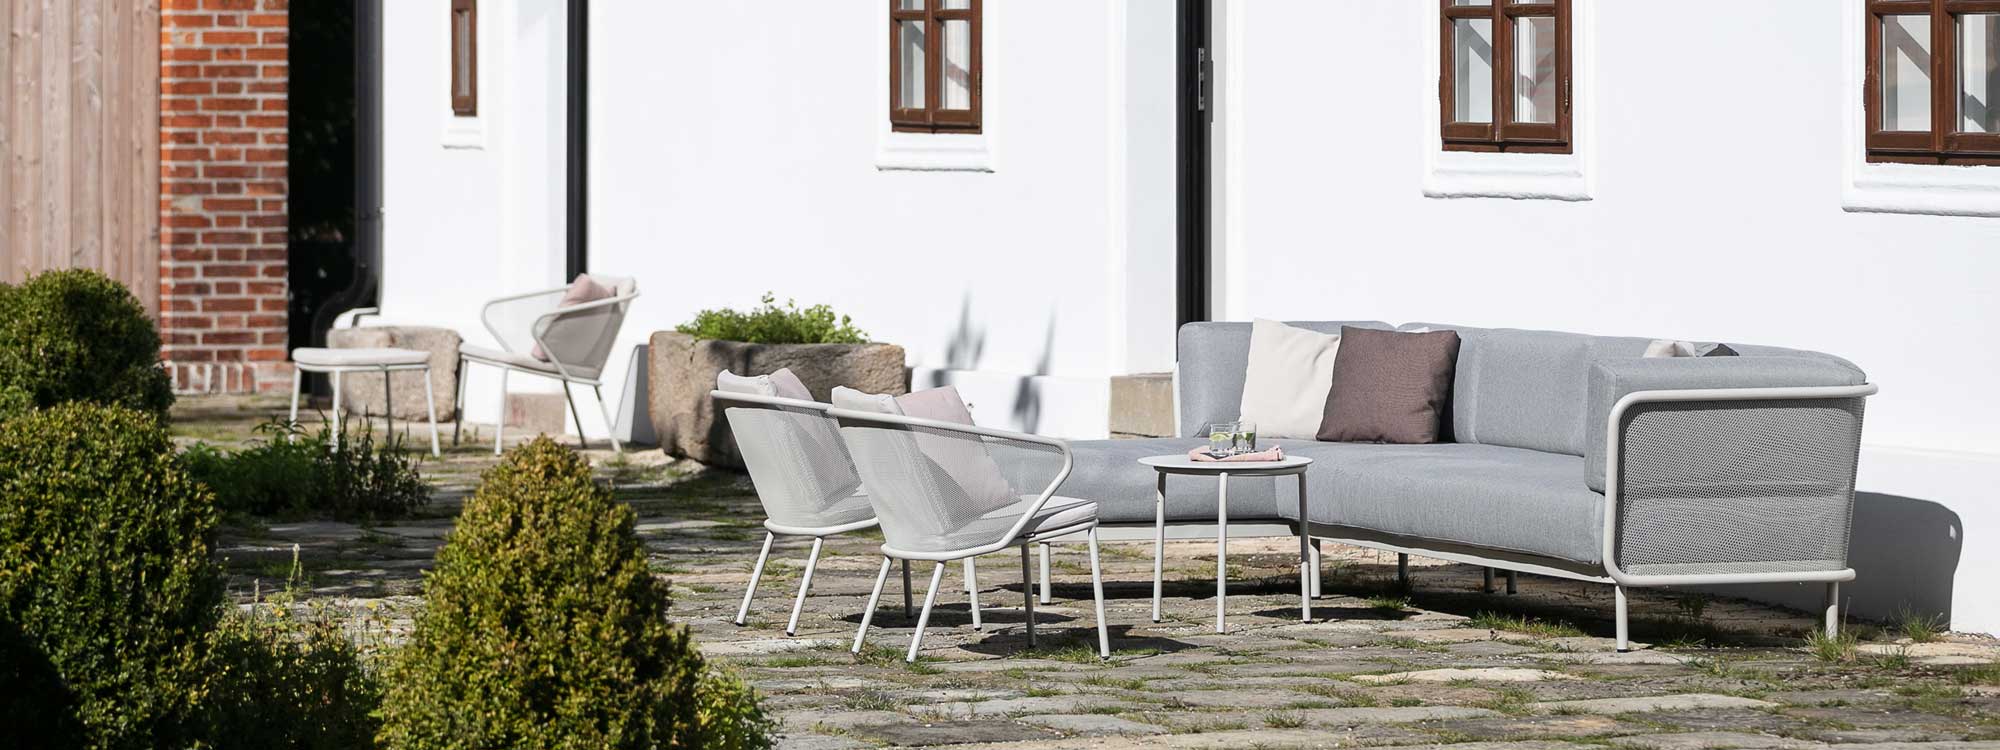 Image of Baza stainless steel garden sofa with Condor lounge chairs and Starling low tables on sunny terrace